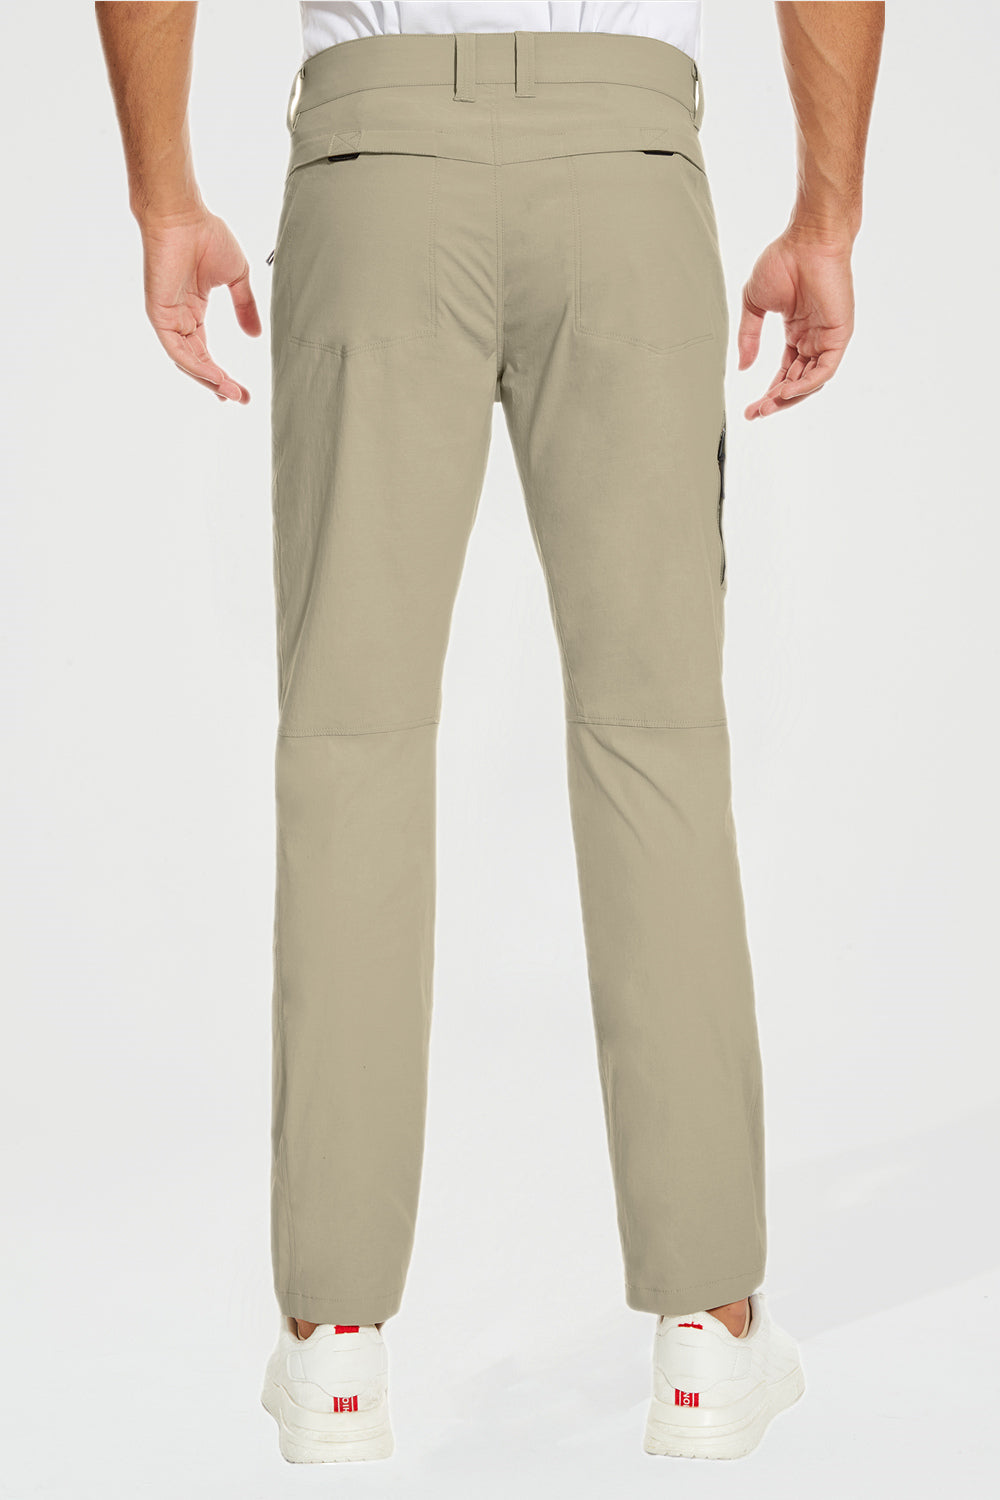 Buy GenericCargo Pants for Men Relaxed Fit Causal Slim Beach Work  Streetwear Khaki Baggy Pants with Zipper Pockets Online at desertcartINDIA